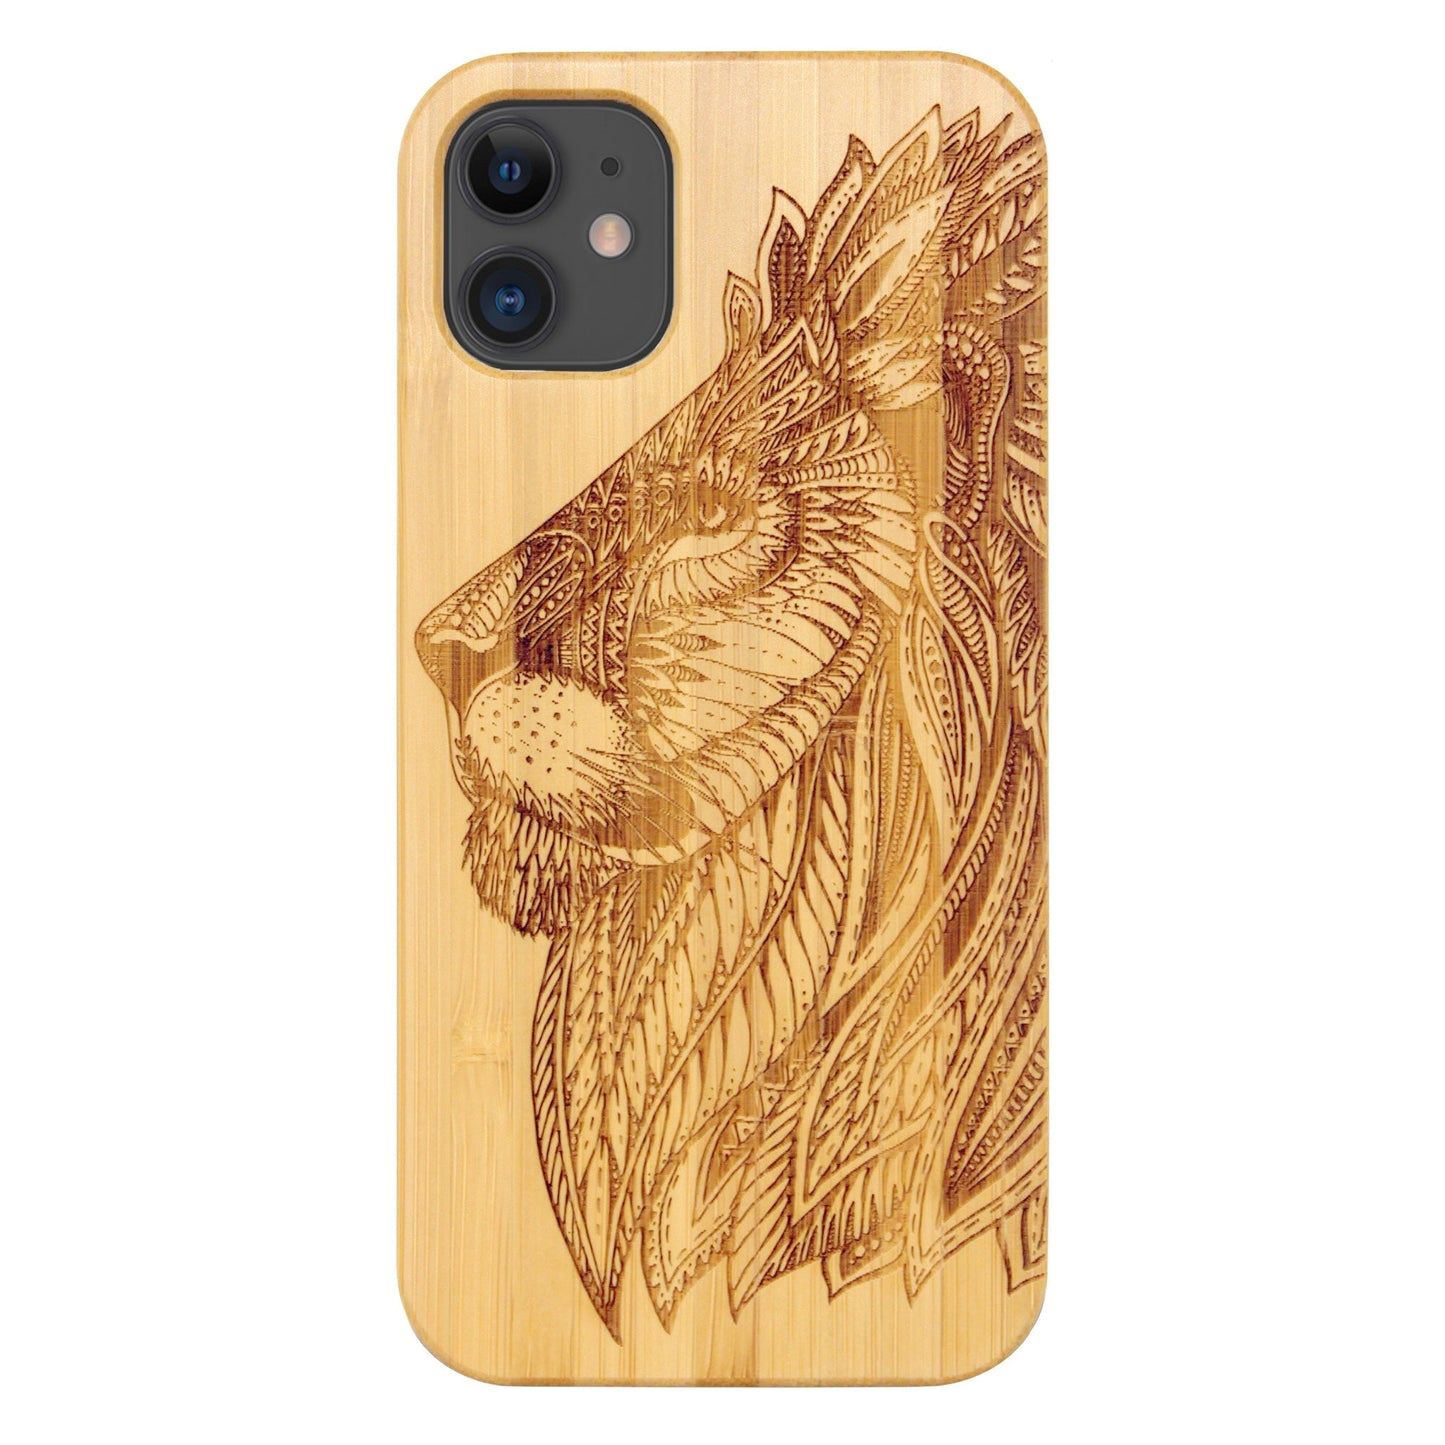 Bamboo lion Eden case for iPhone 11 